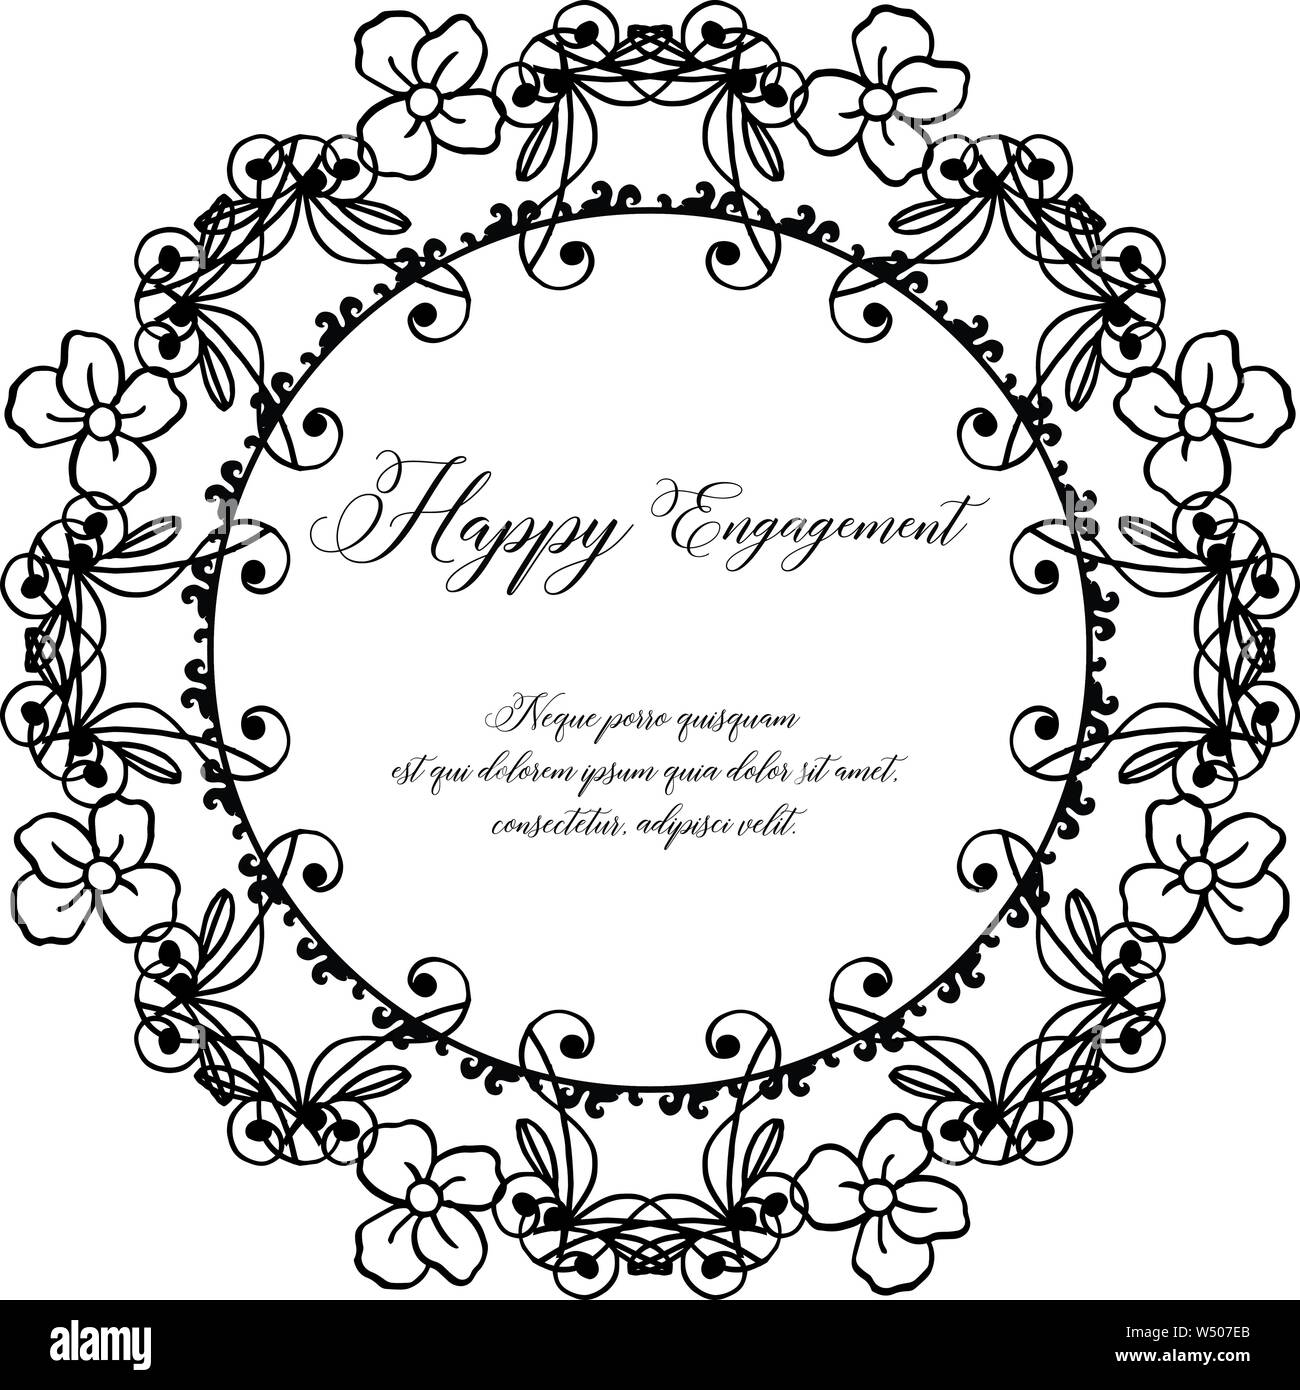 Decoration card happy engagement, with drawing cute floral frame ...